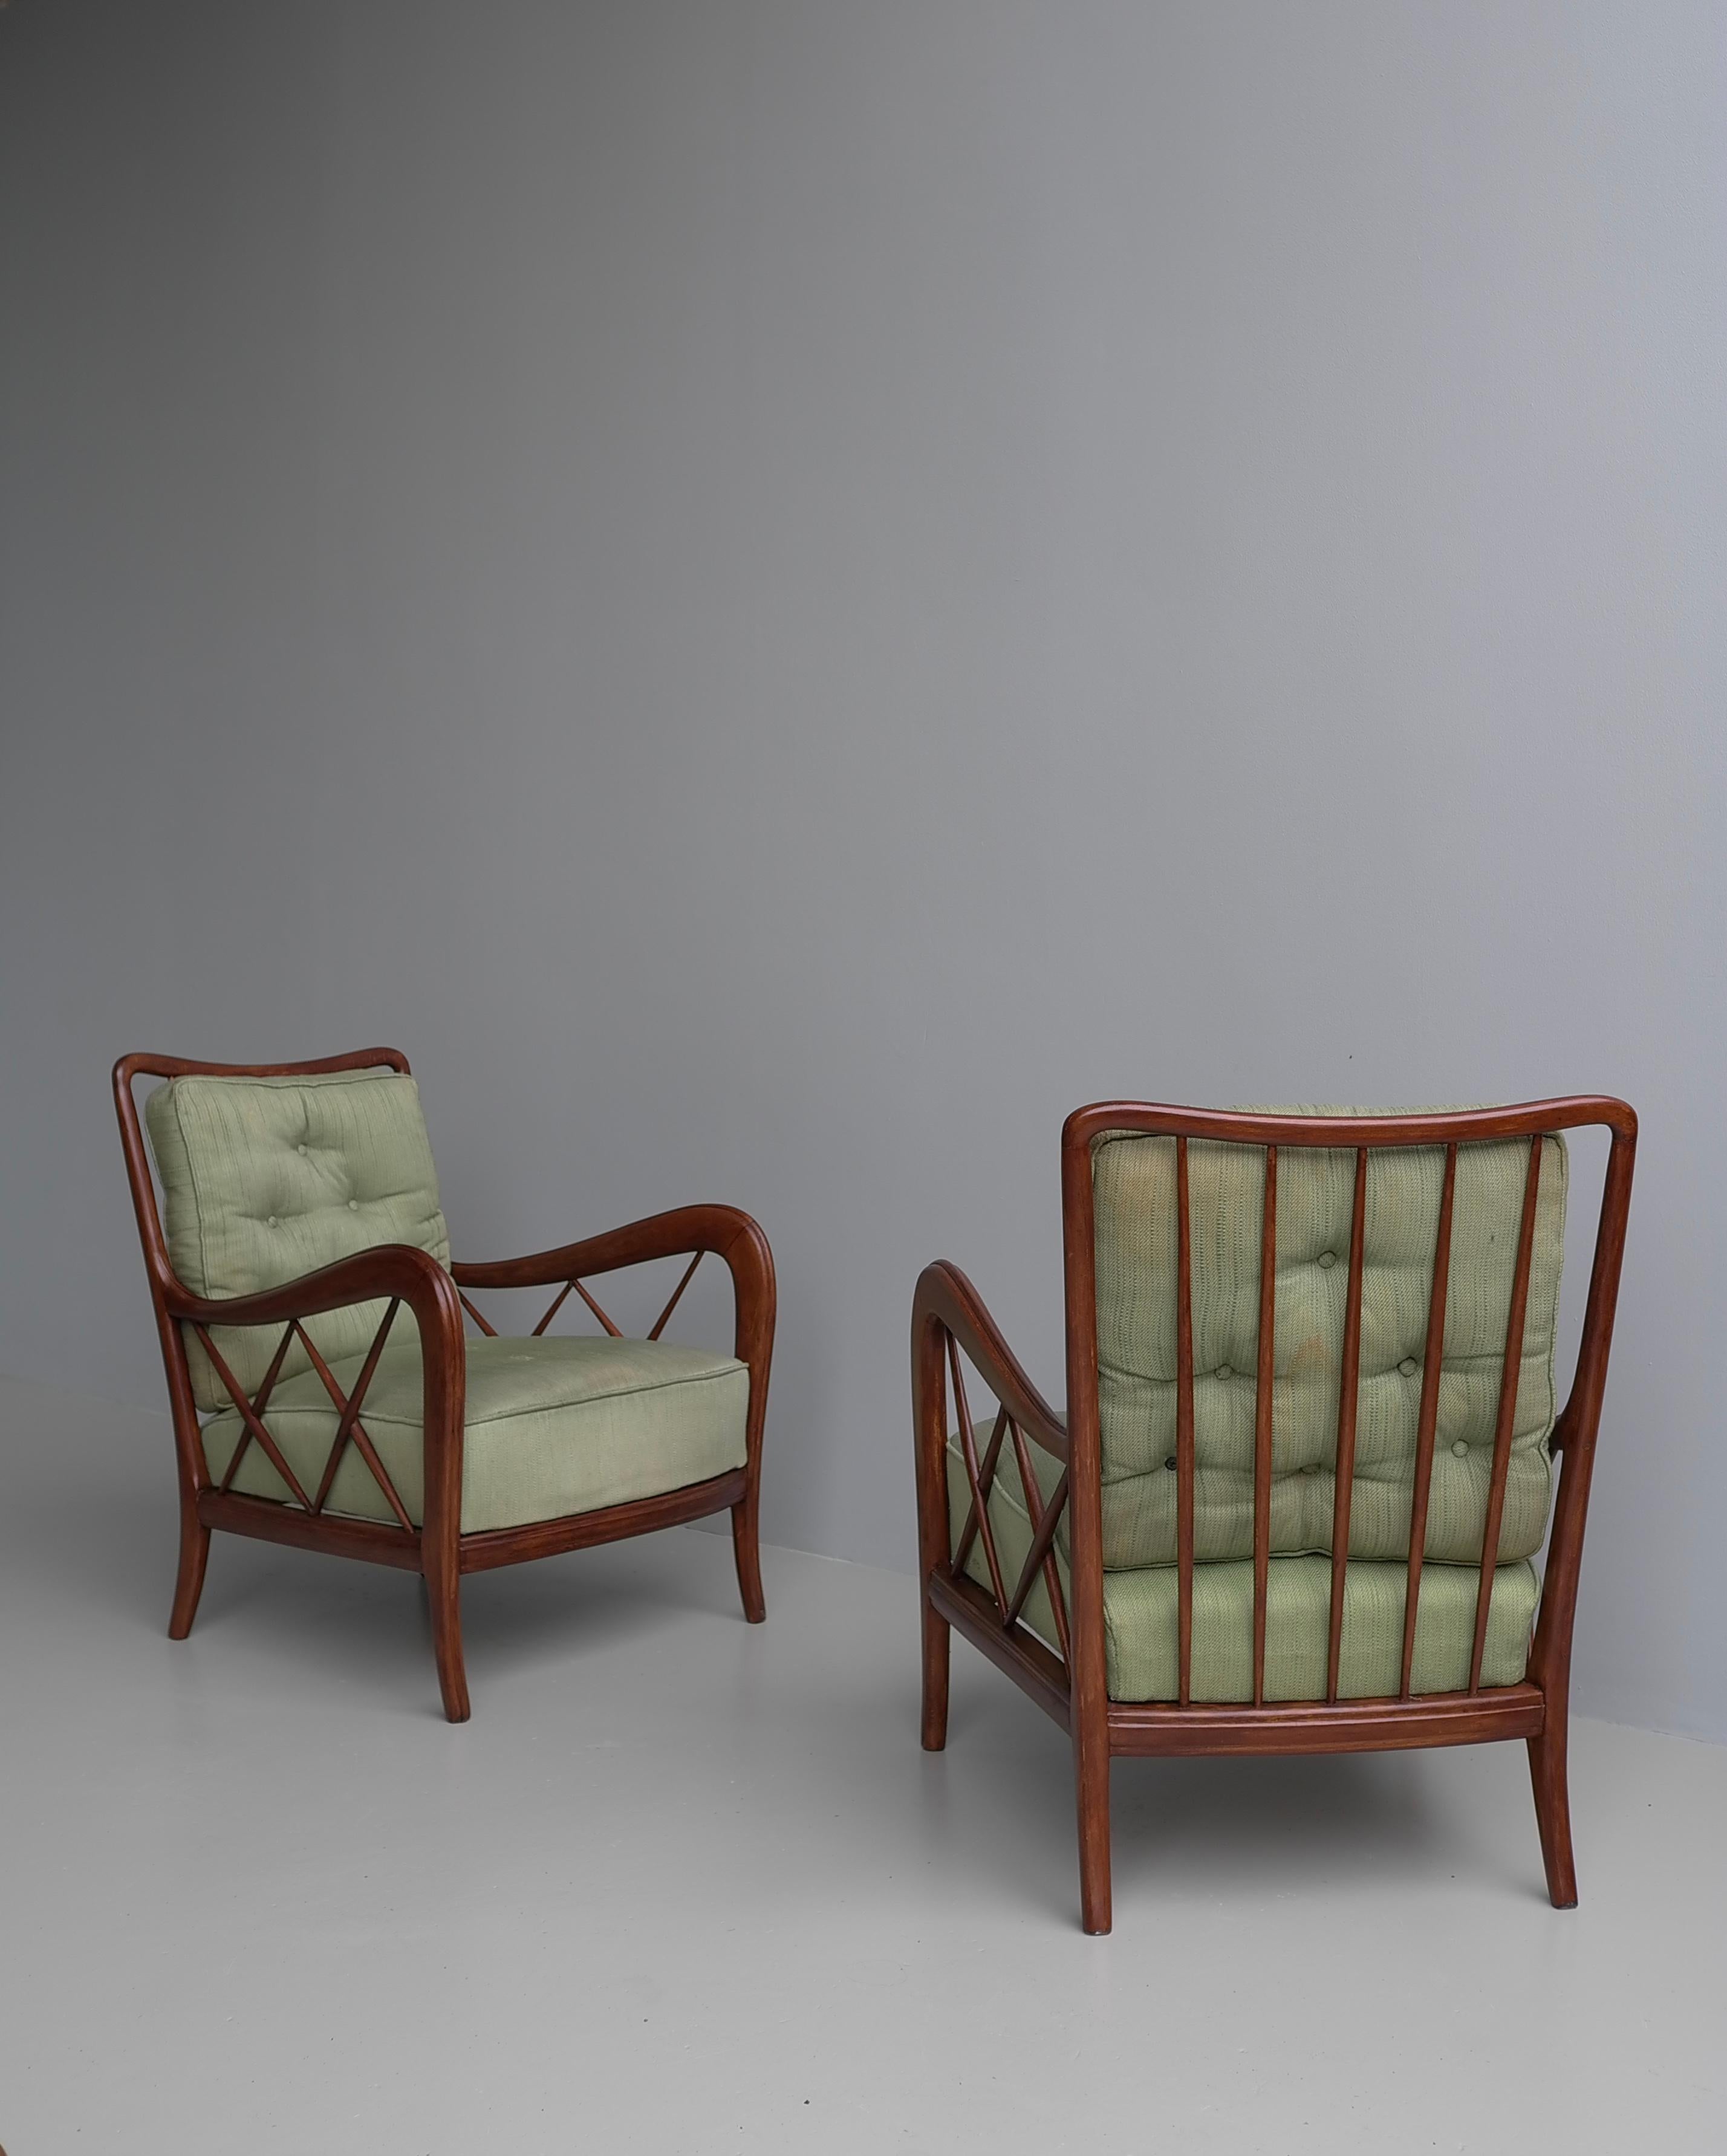 Walnut Wooden Lounge Chairs attr Paolo Buffa, Milan Italy 1940's For Sale 1